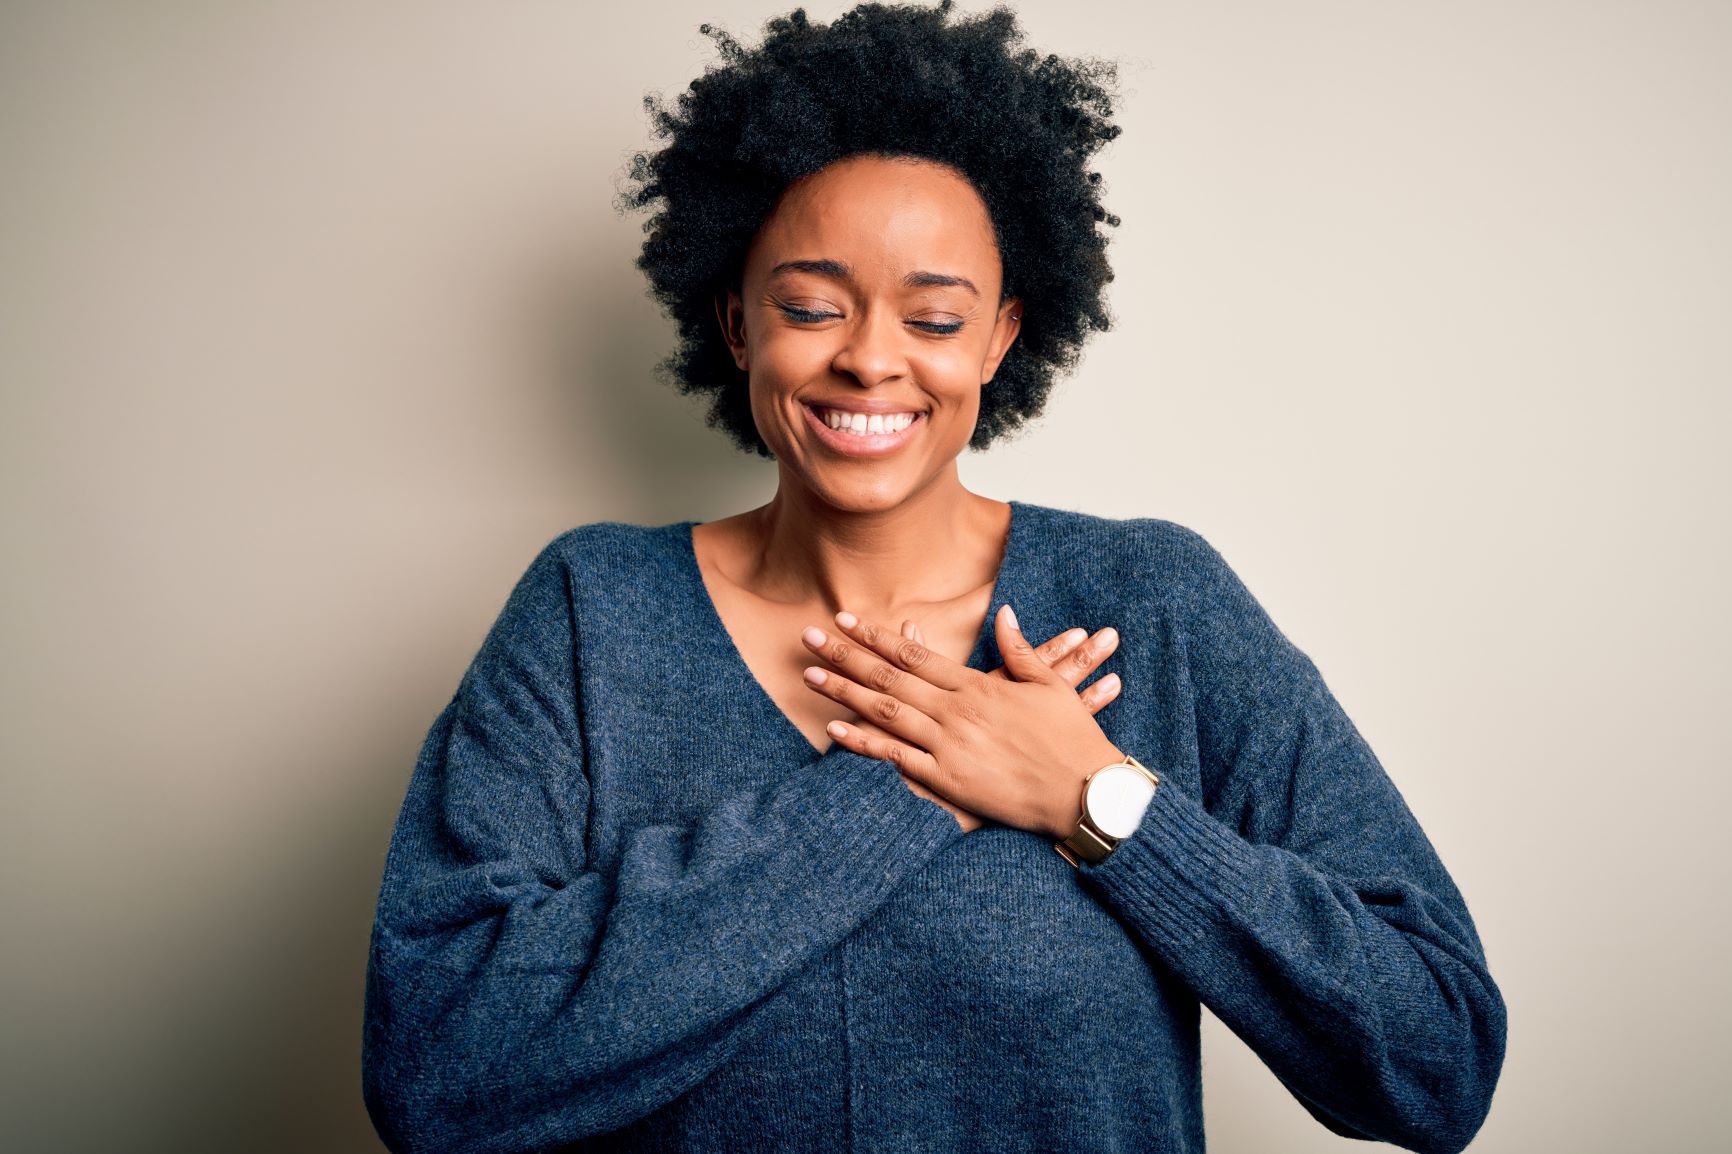 Woman in sweater smiles big with hands over heart.